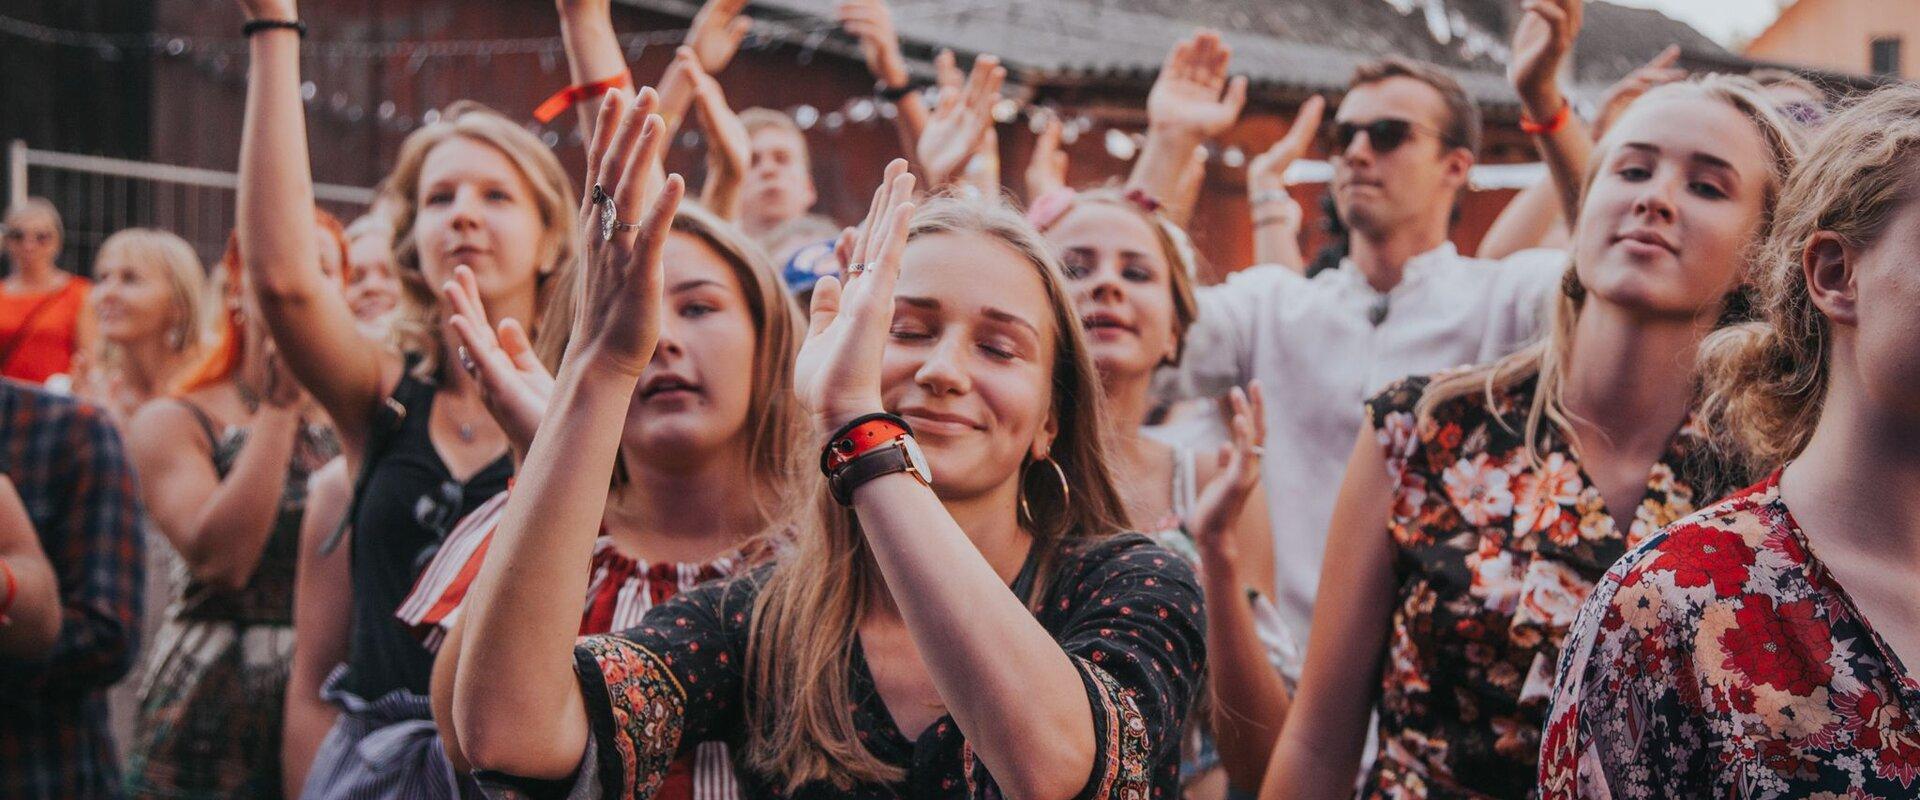 The festival takes place every July in the castle park and centre of Viljandi. It is the strongest expression of a special mindset originating from th